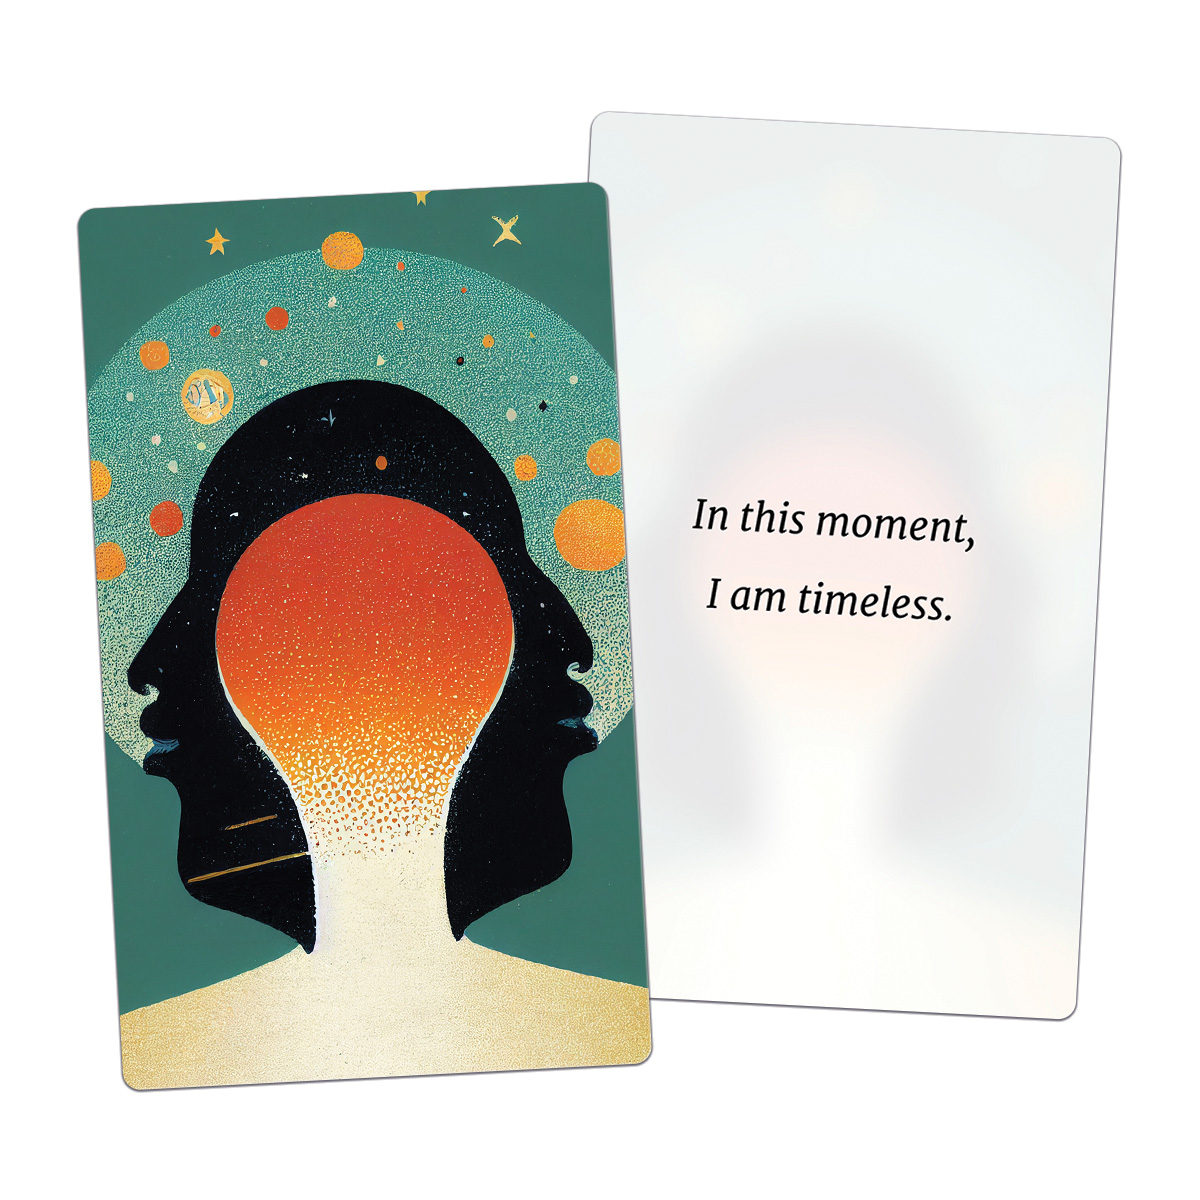 In this moment, I am timeless. (AFFIRMATION CARD)